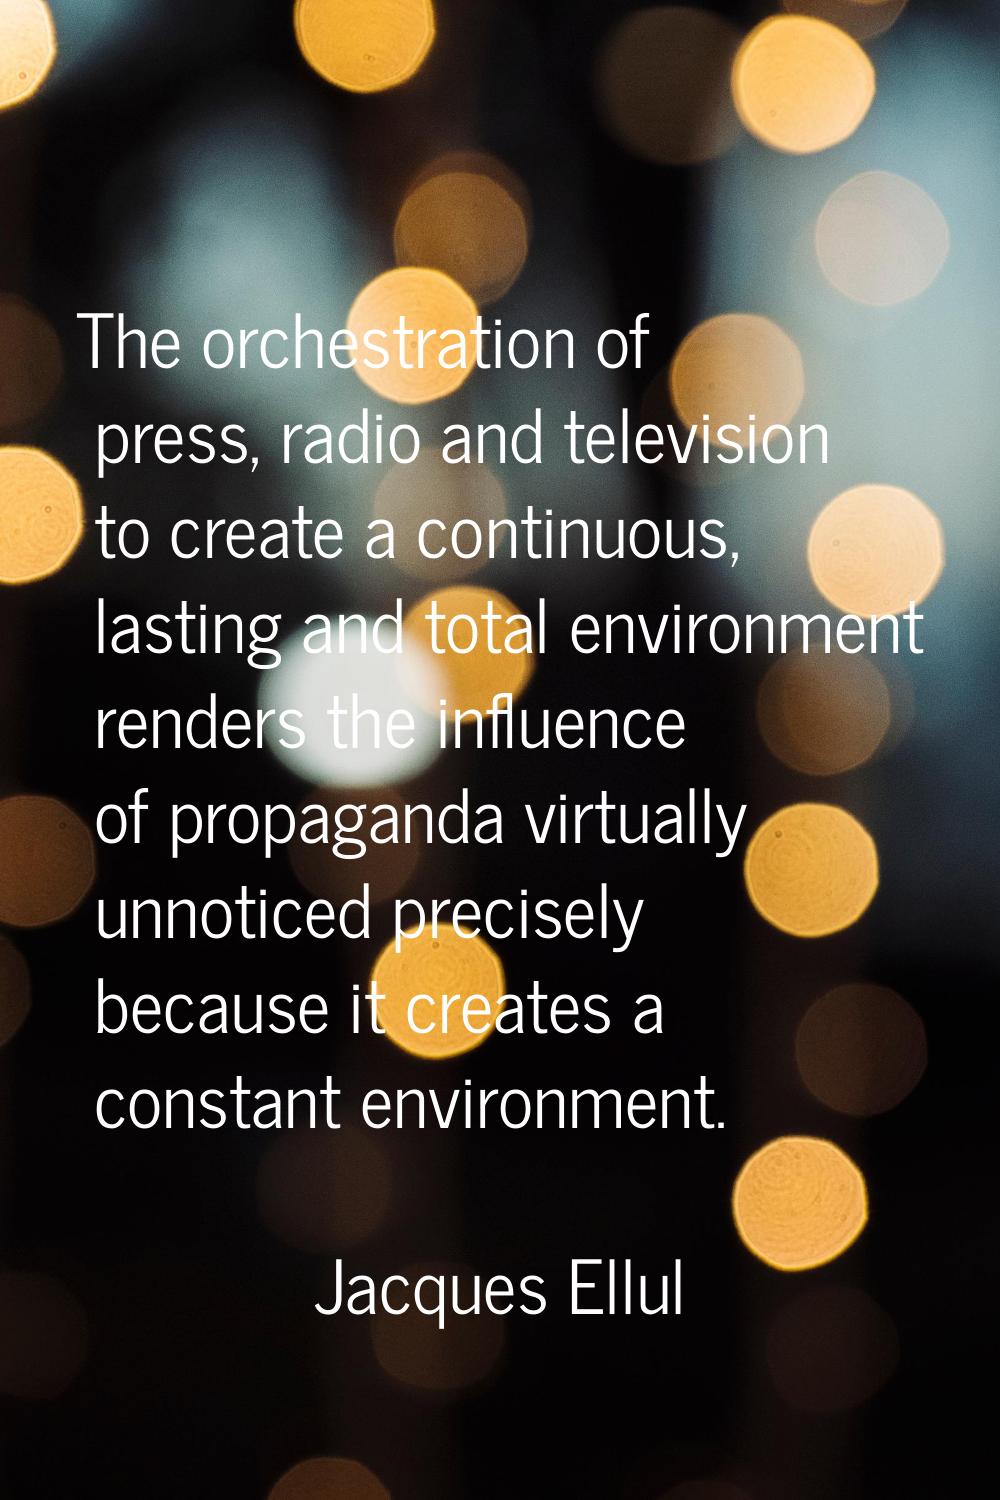 The orchestration of press, radio and television to create a continuous, lasting and total environm